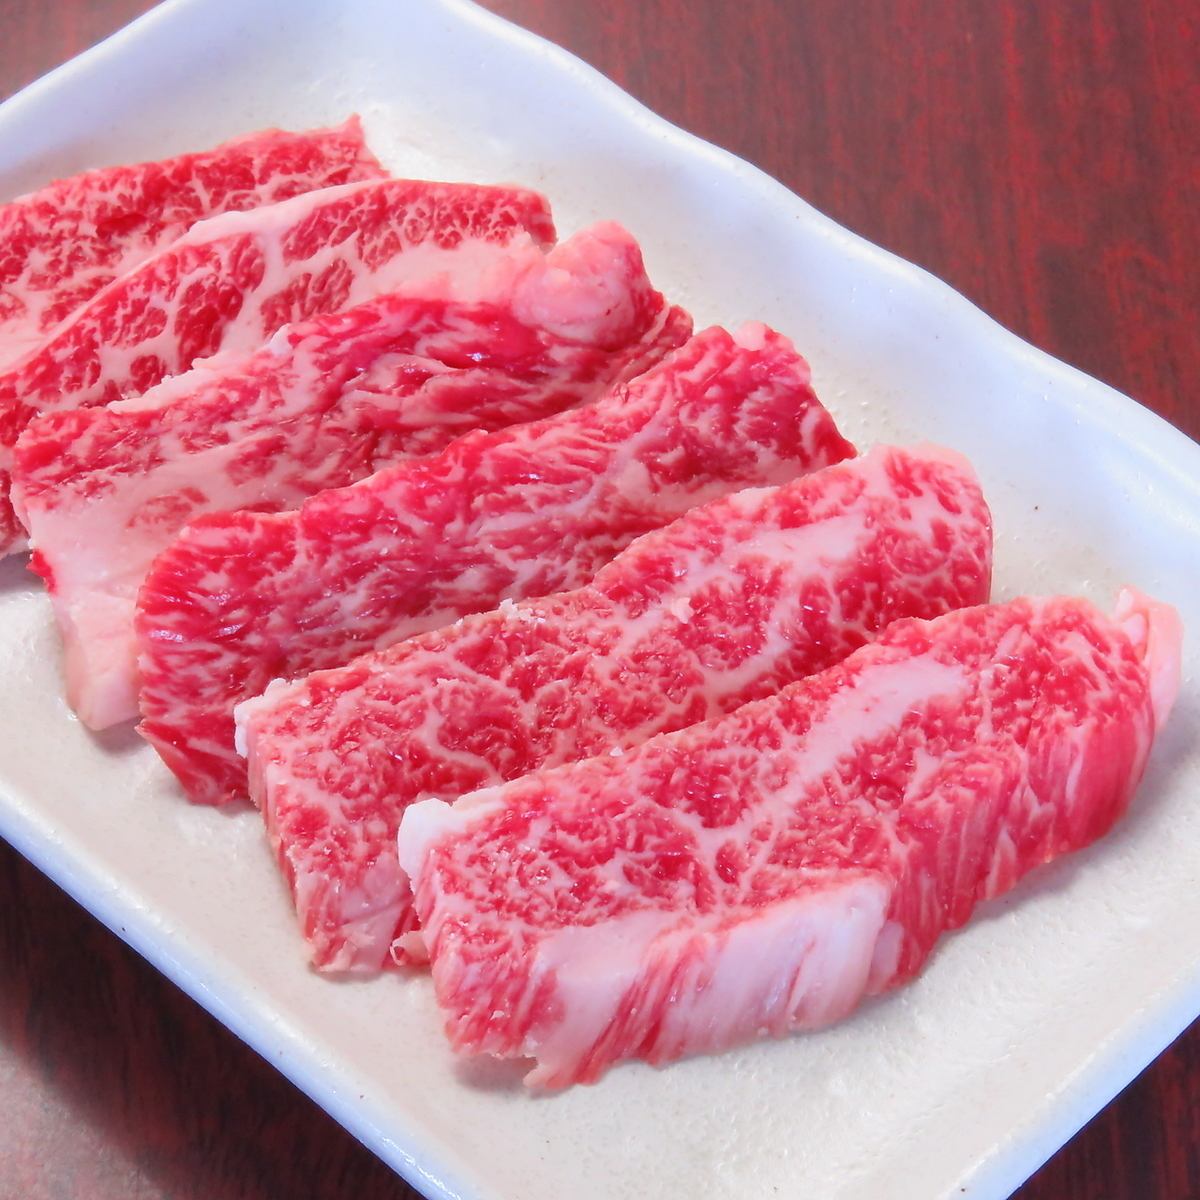 You can enjoy our proud wagyu beef yakiniku at a reasonable price!